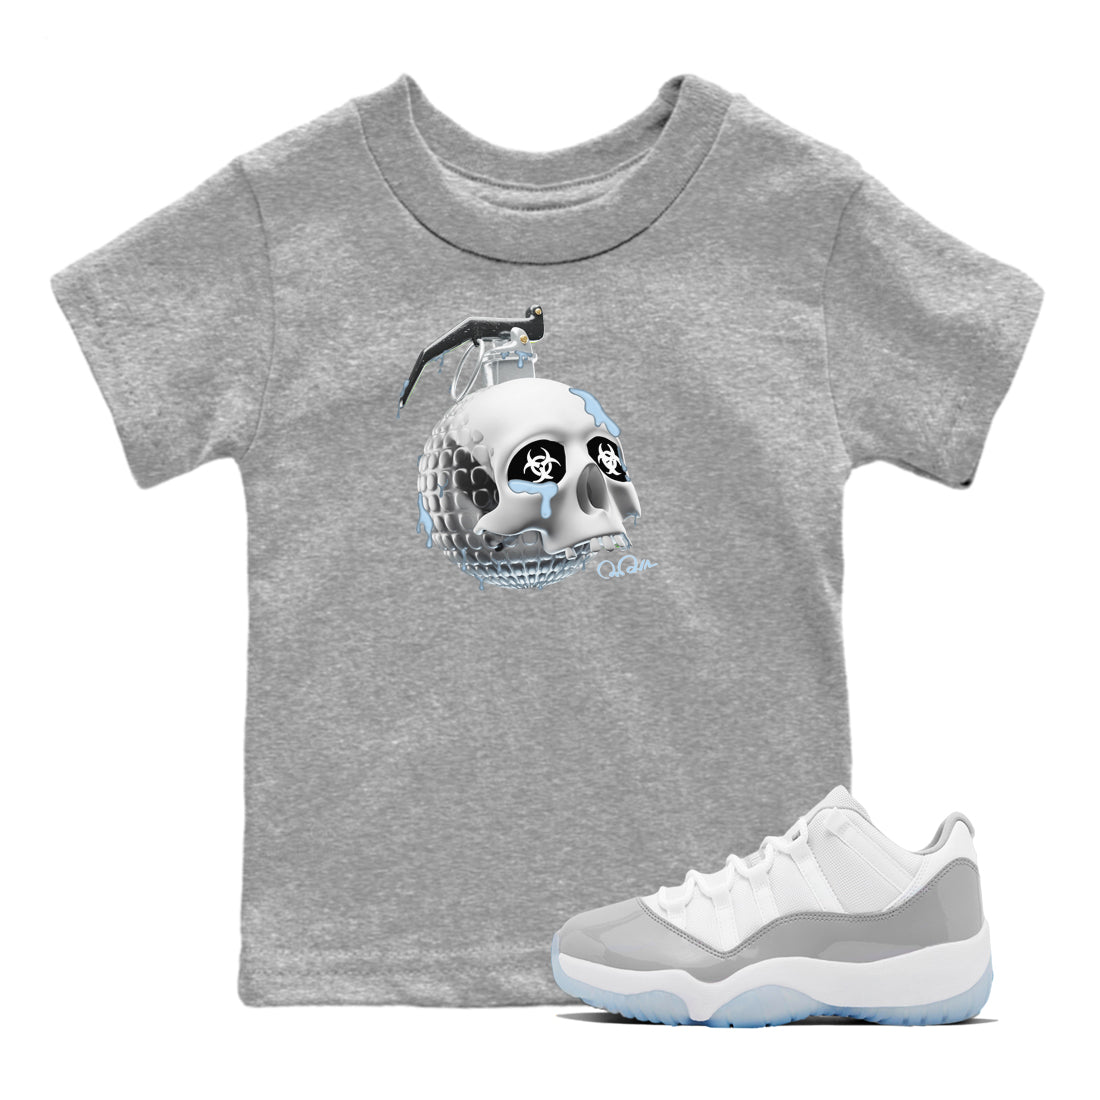 Air Jordan 11 White Cement Skull Bomb Baby and Kids Sneaker Tees Air Jordan 11 Cement Grey Kids Sneaker Tees Size Chart